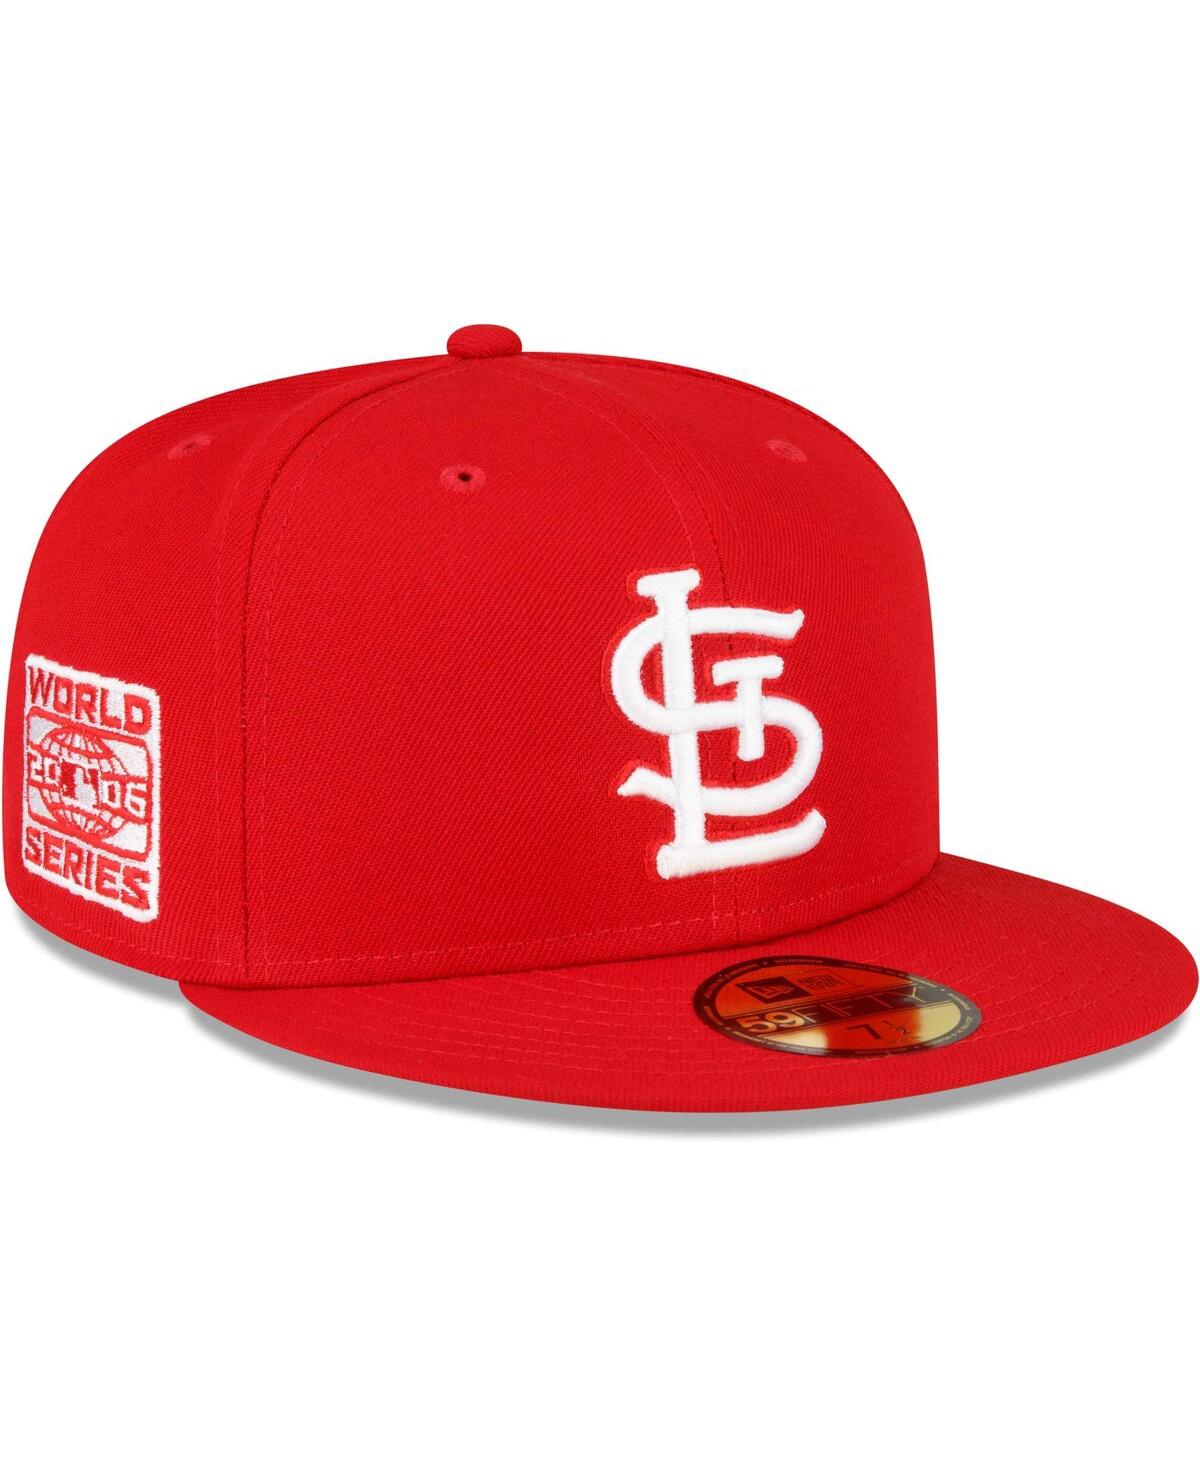 NEW ERA MEN'S NEW ERA RED ST. LOUIS CARDINALS SIDEPATCH 59FIFTY FITTED HAT